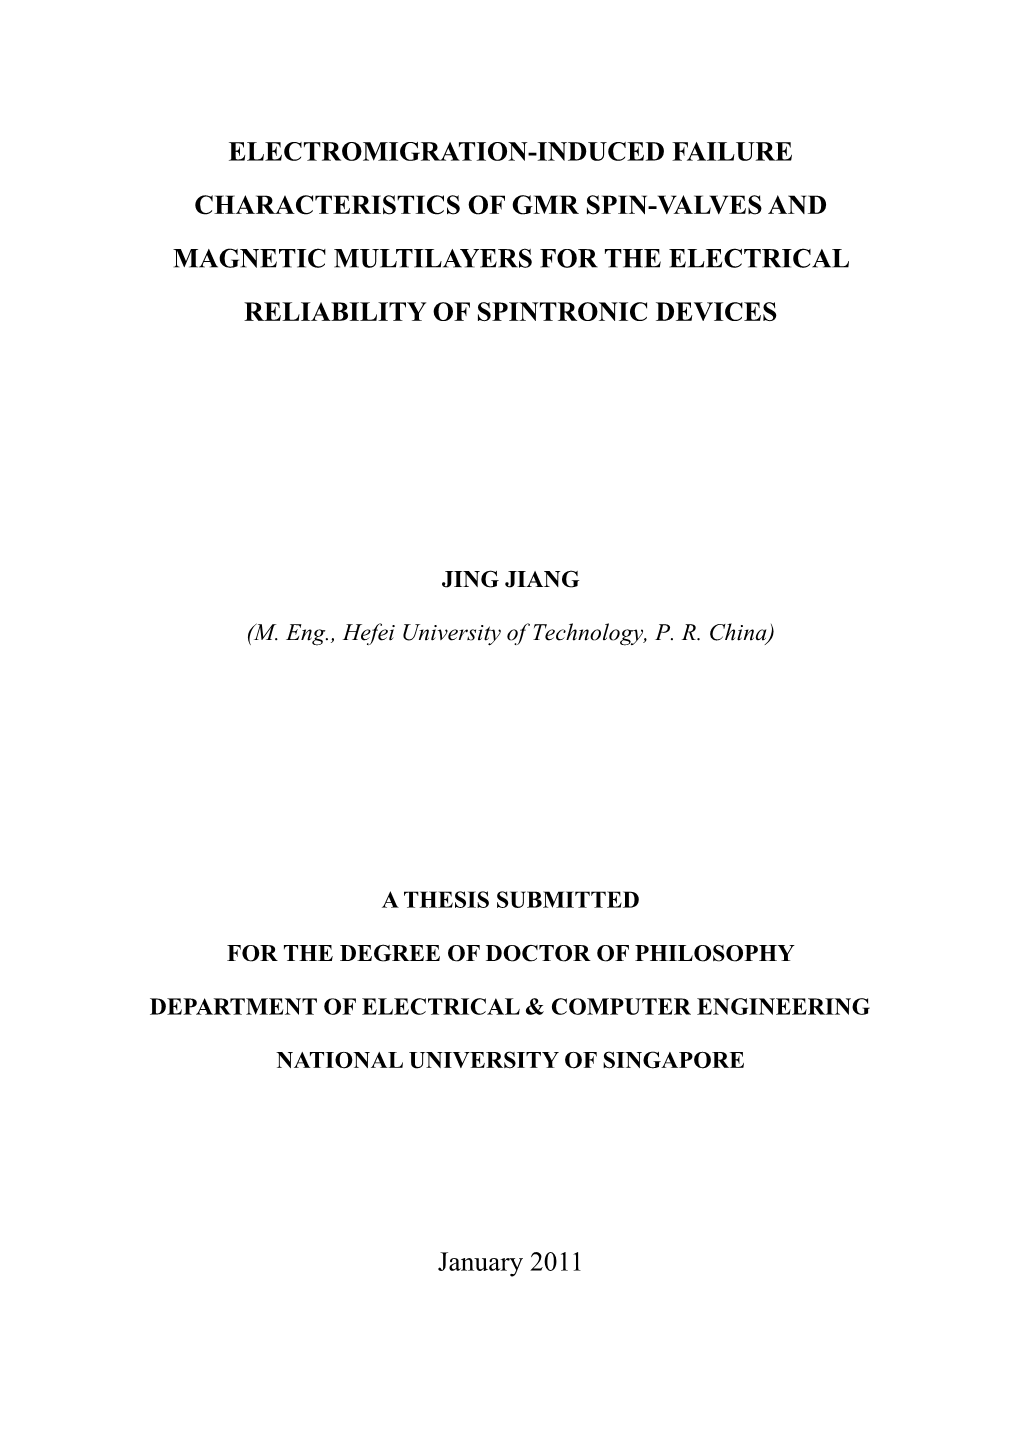 Electromigration-Induced Failure Characteristics of Gmr Spin-Valves and Magnetic Multilayers for the Electrical Reliability of Spintronic Devices